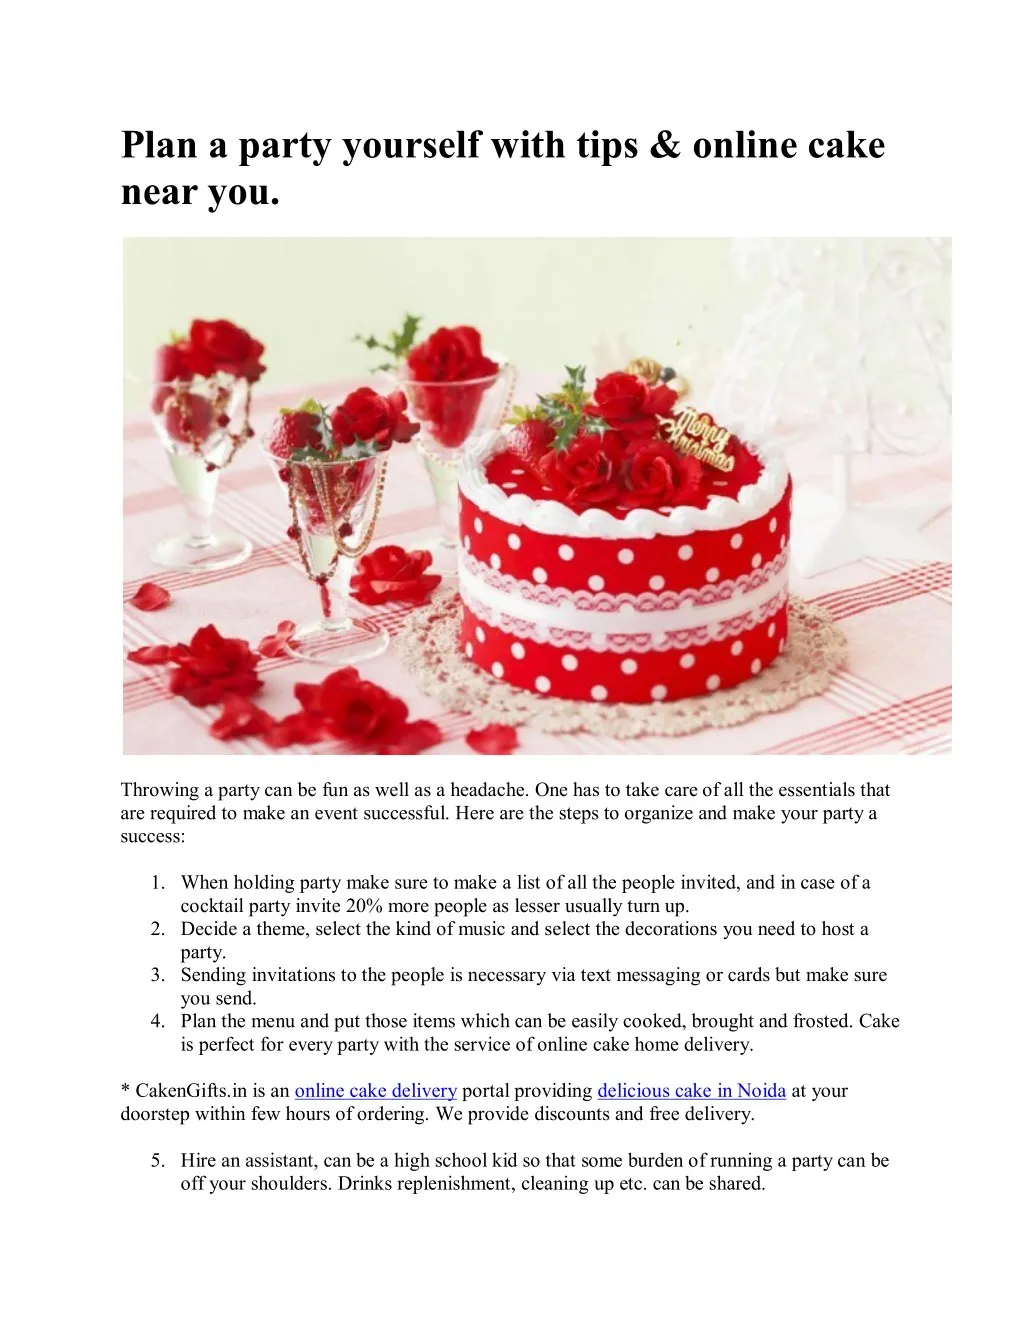 plan a party yourself with tips online cake near